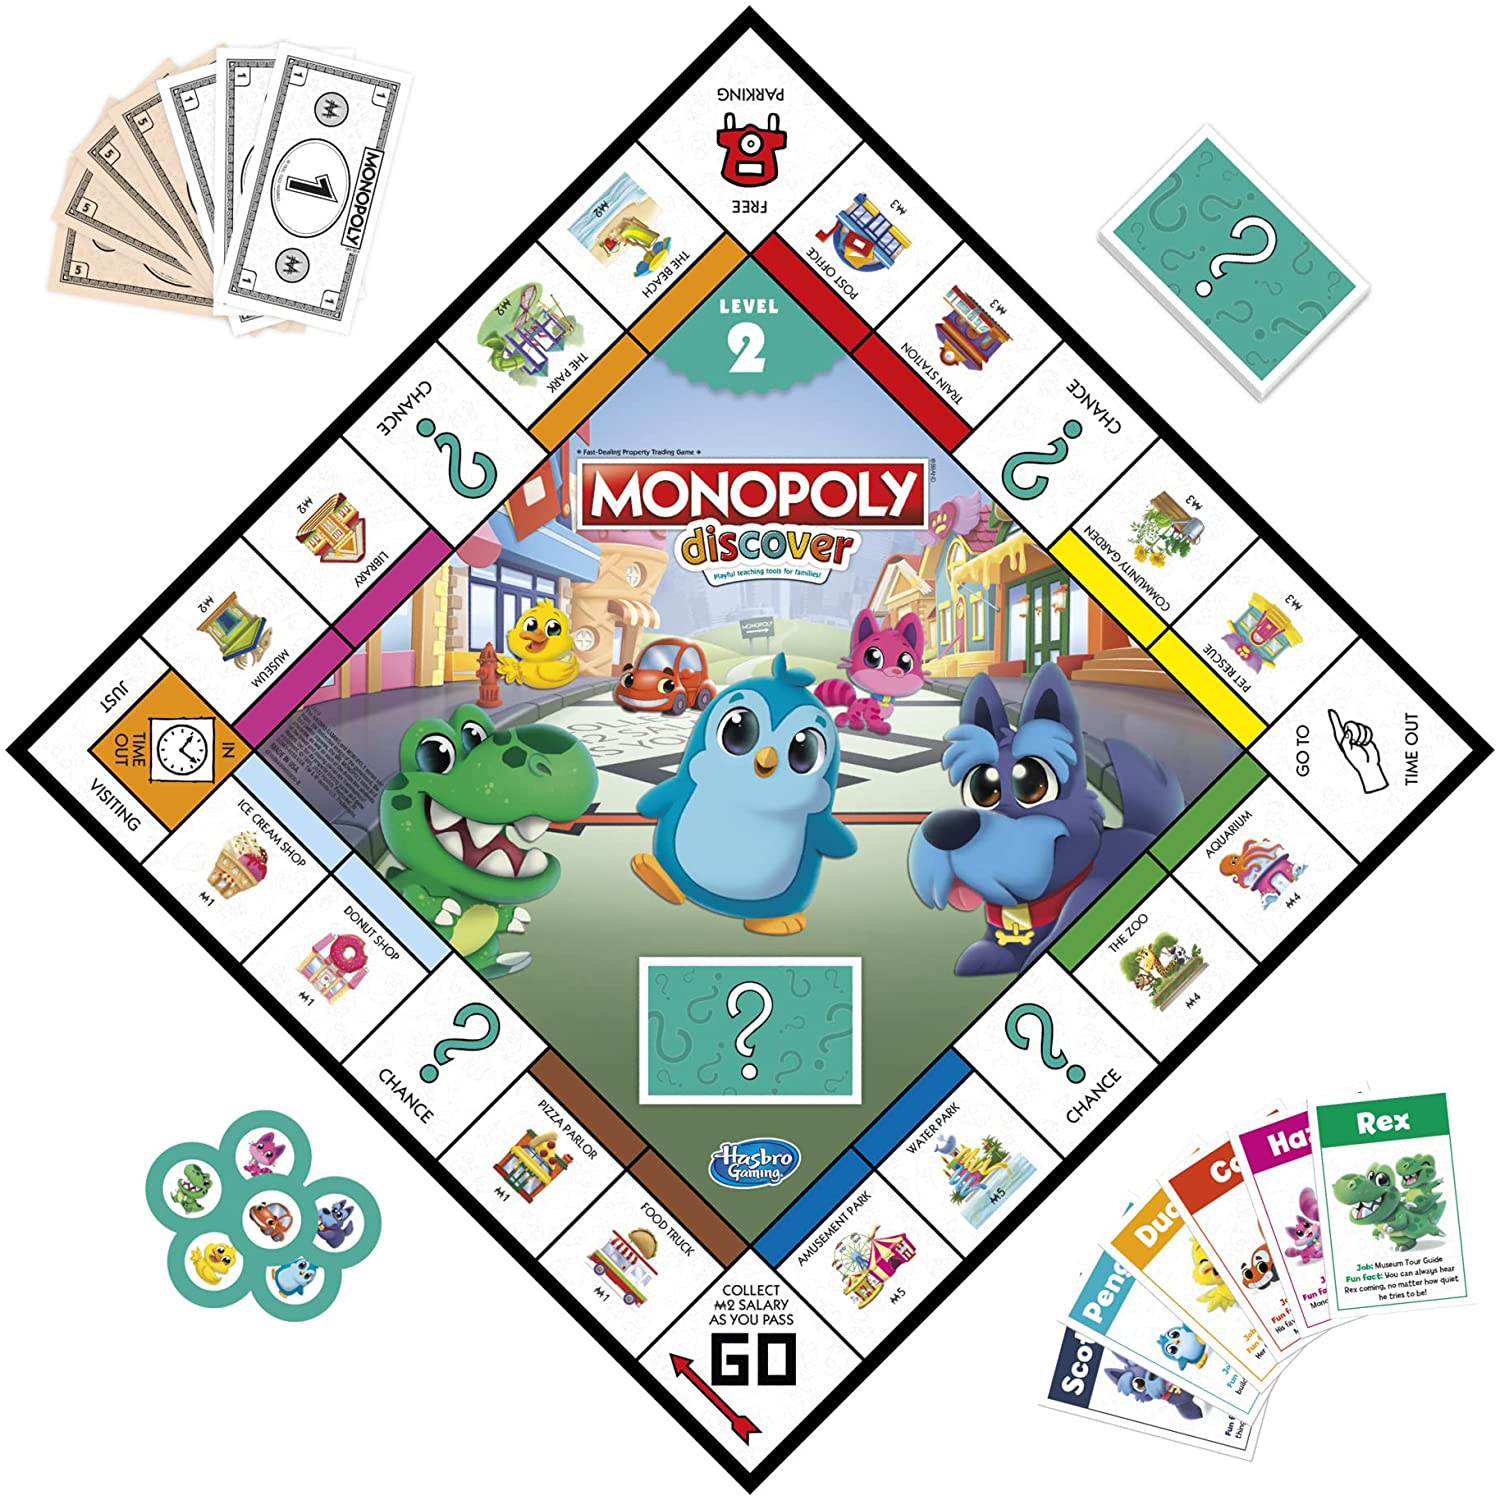 monopoly discover rules